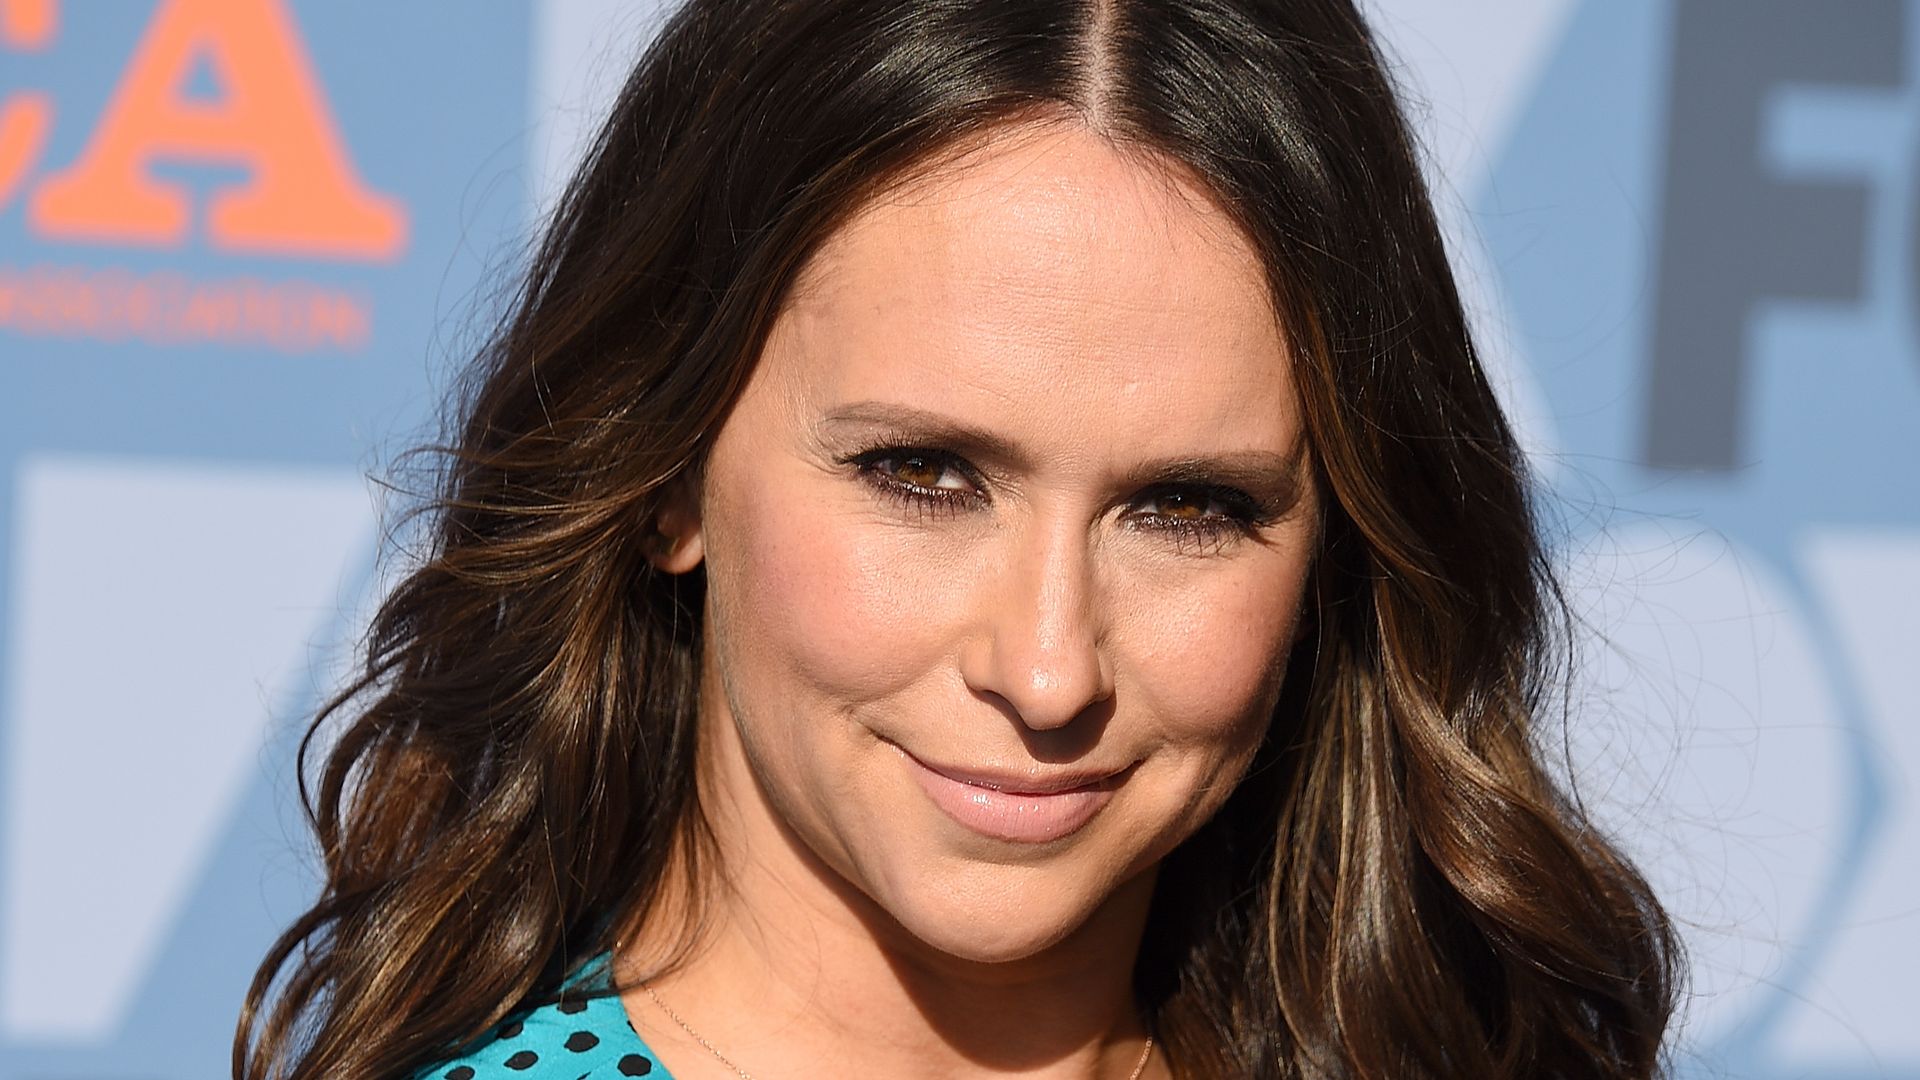 Jennifer Love Hewitt reveals seriously chic hair transformation in new video